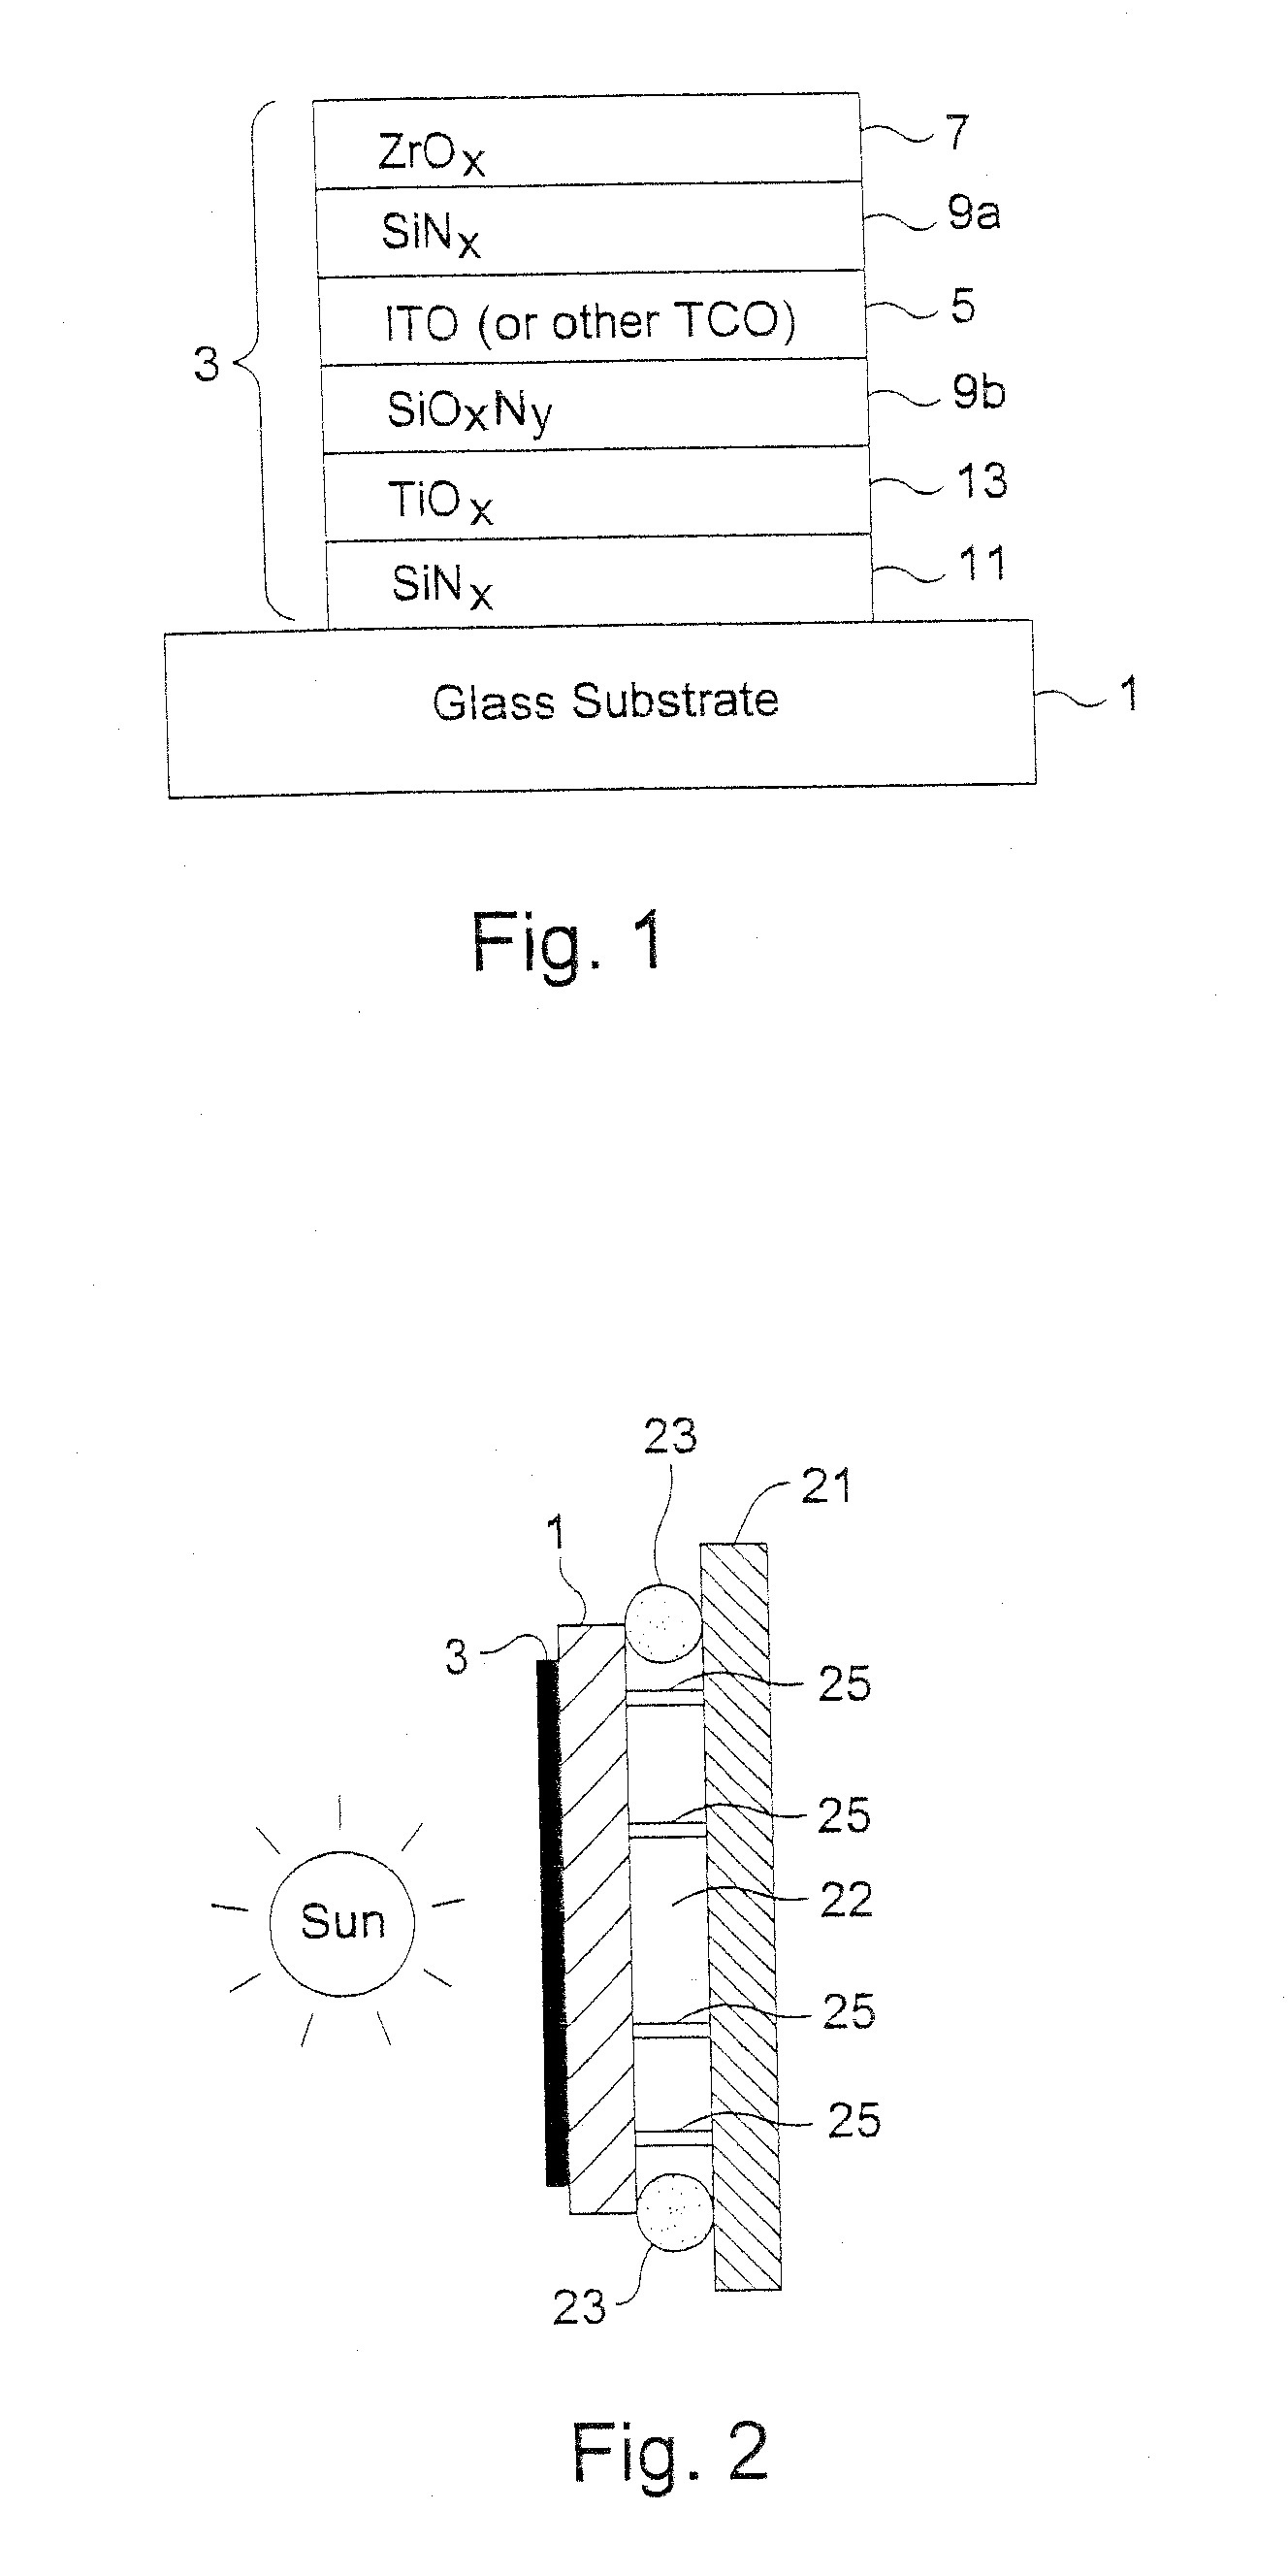 Articles including anticondensation and/or low-e coatings and/or methods of making the same